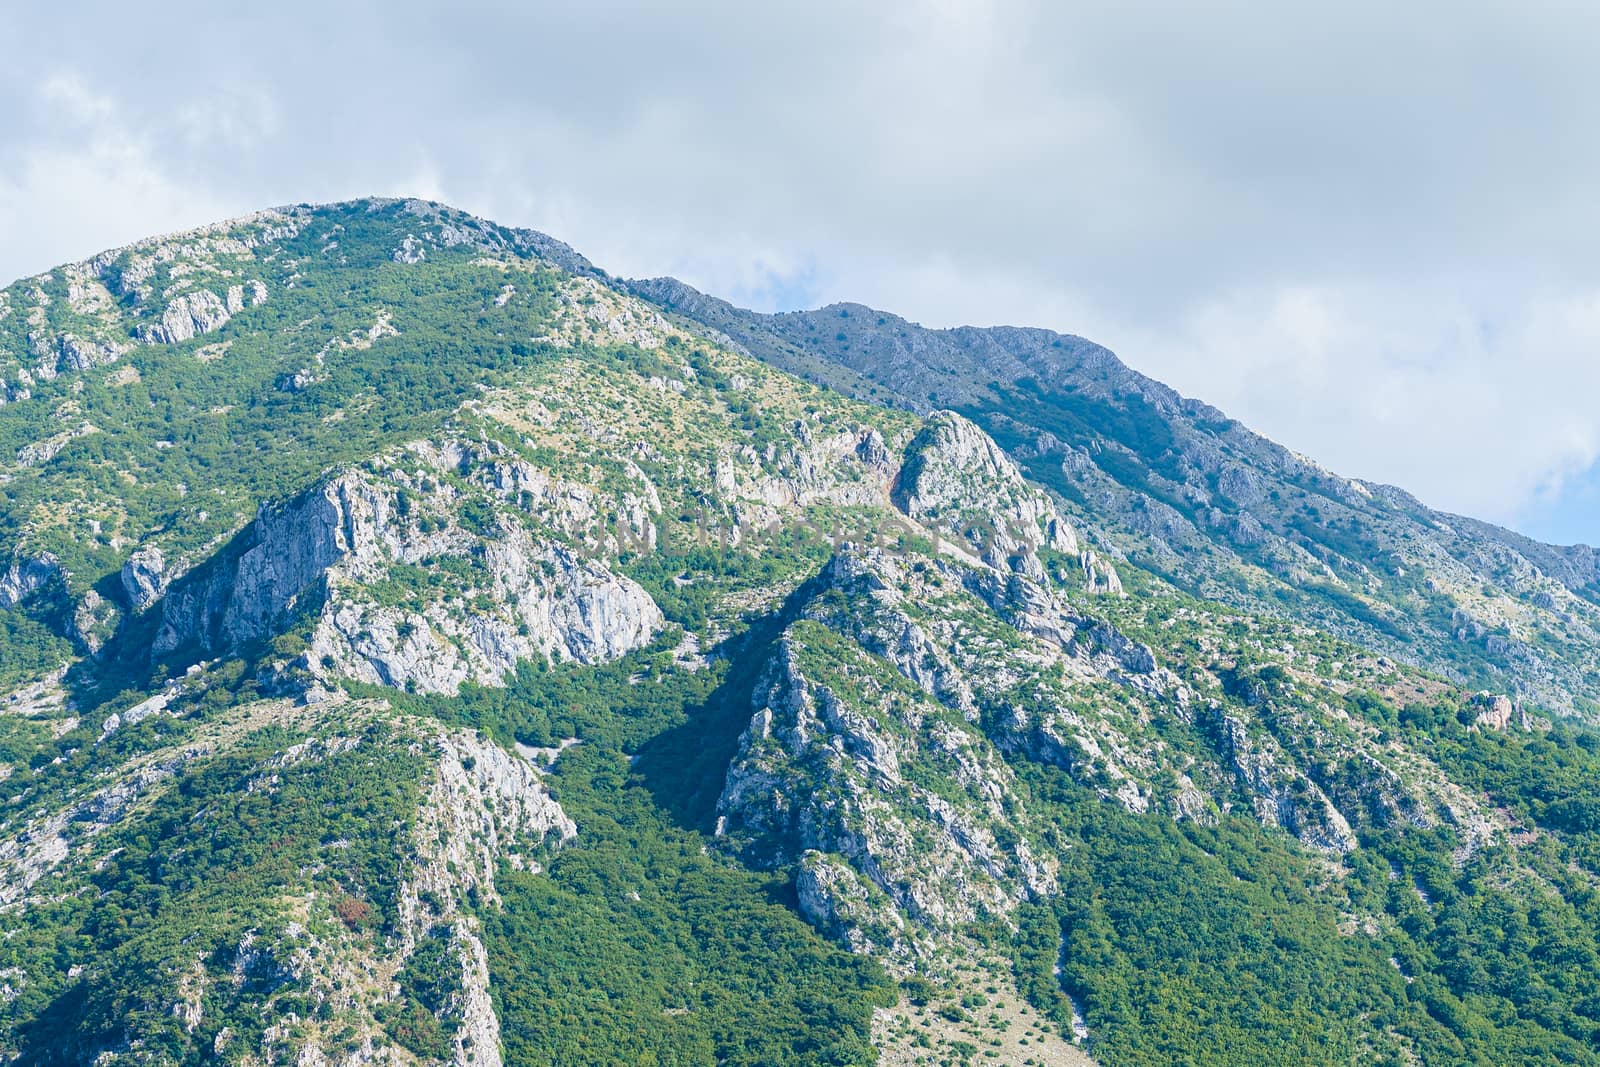 peaks and slopes of mountains covered with vegetation against a blue sky  by VADIM